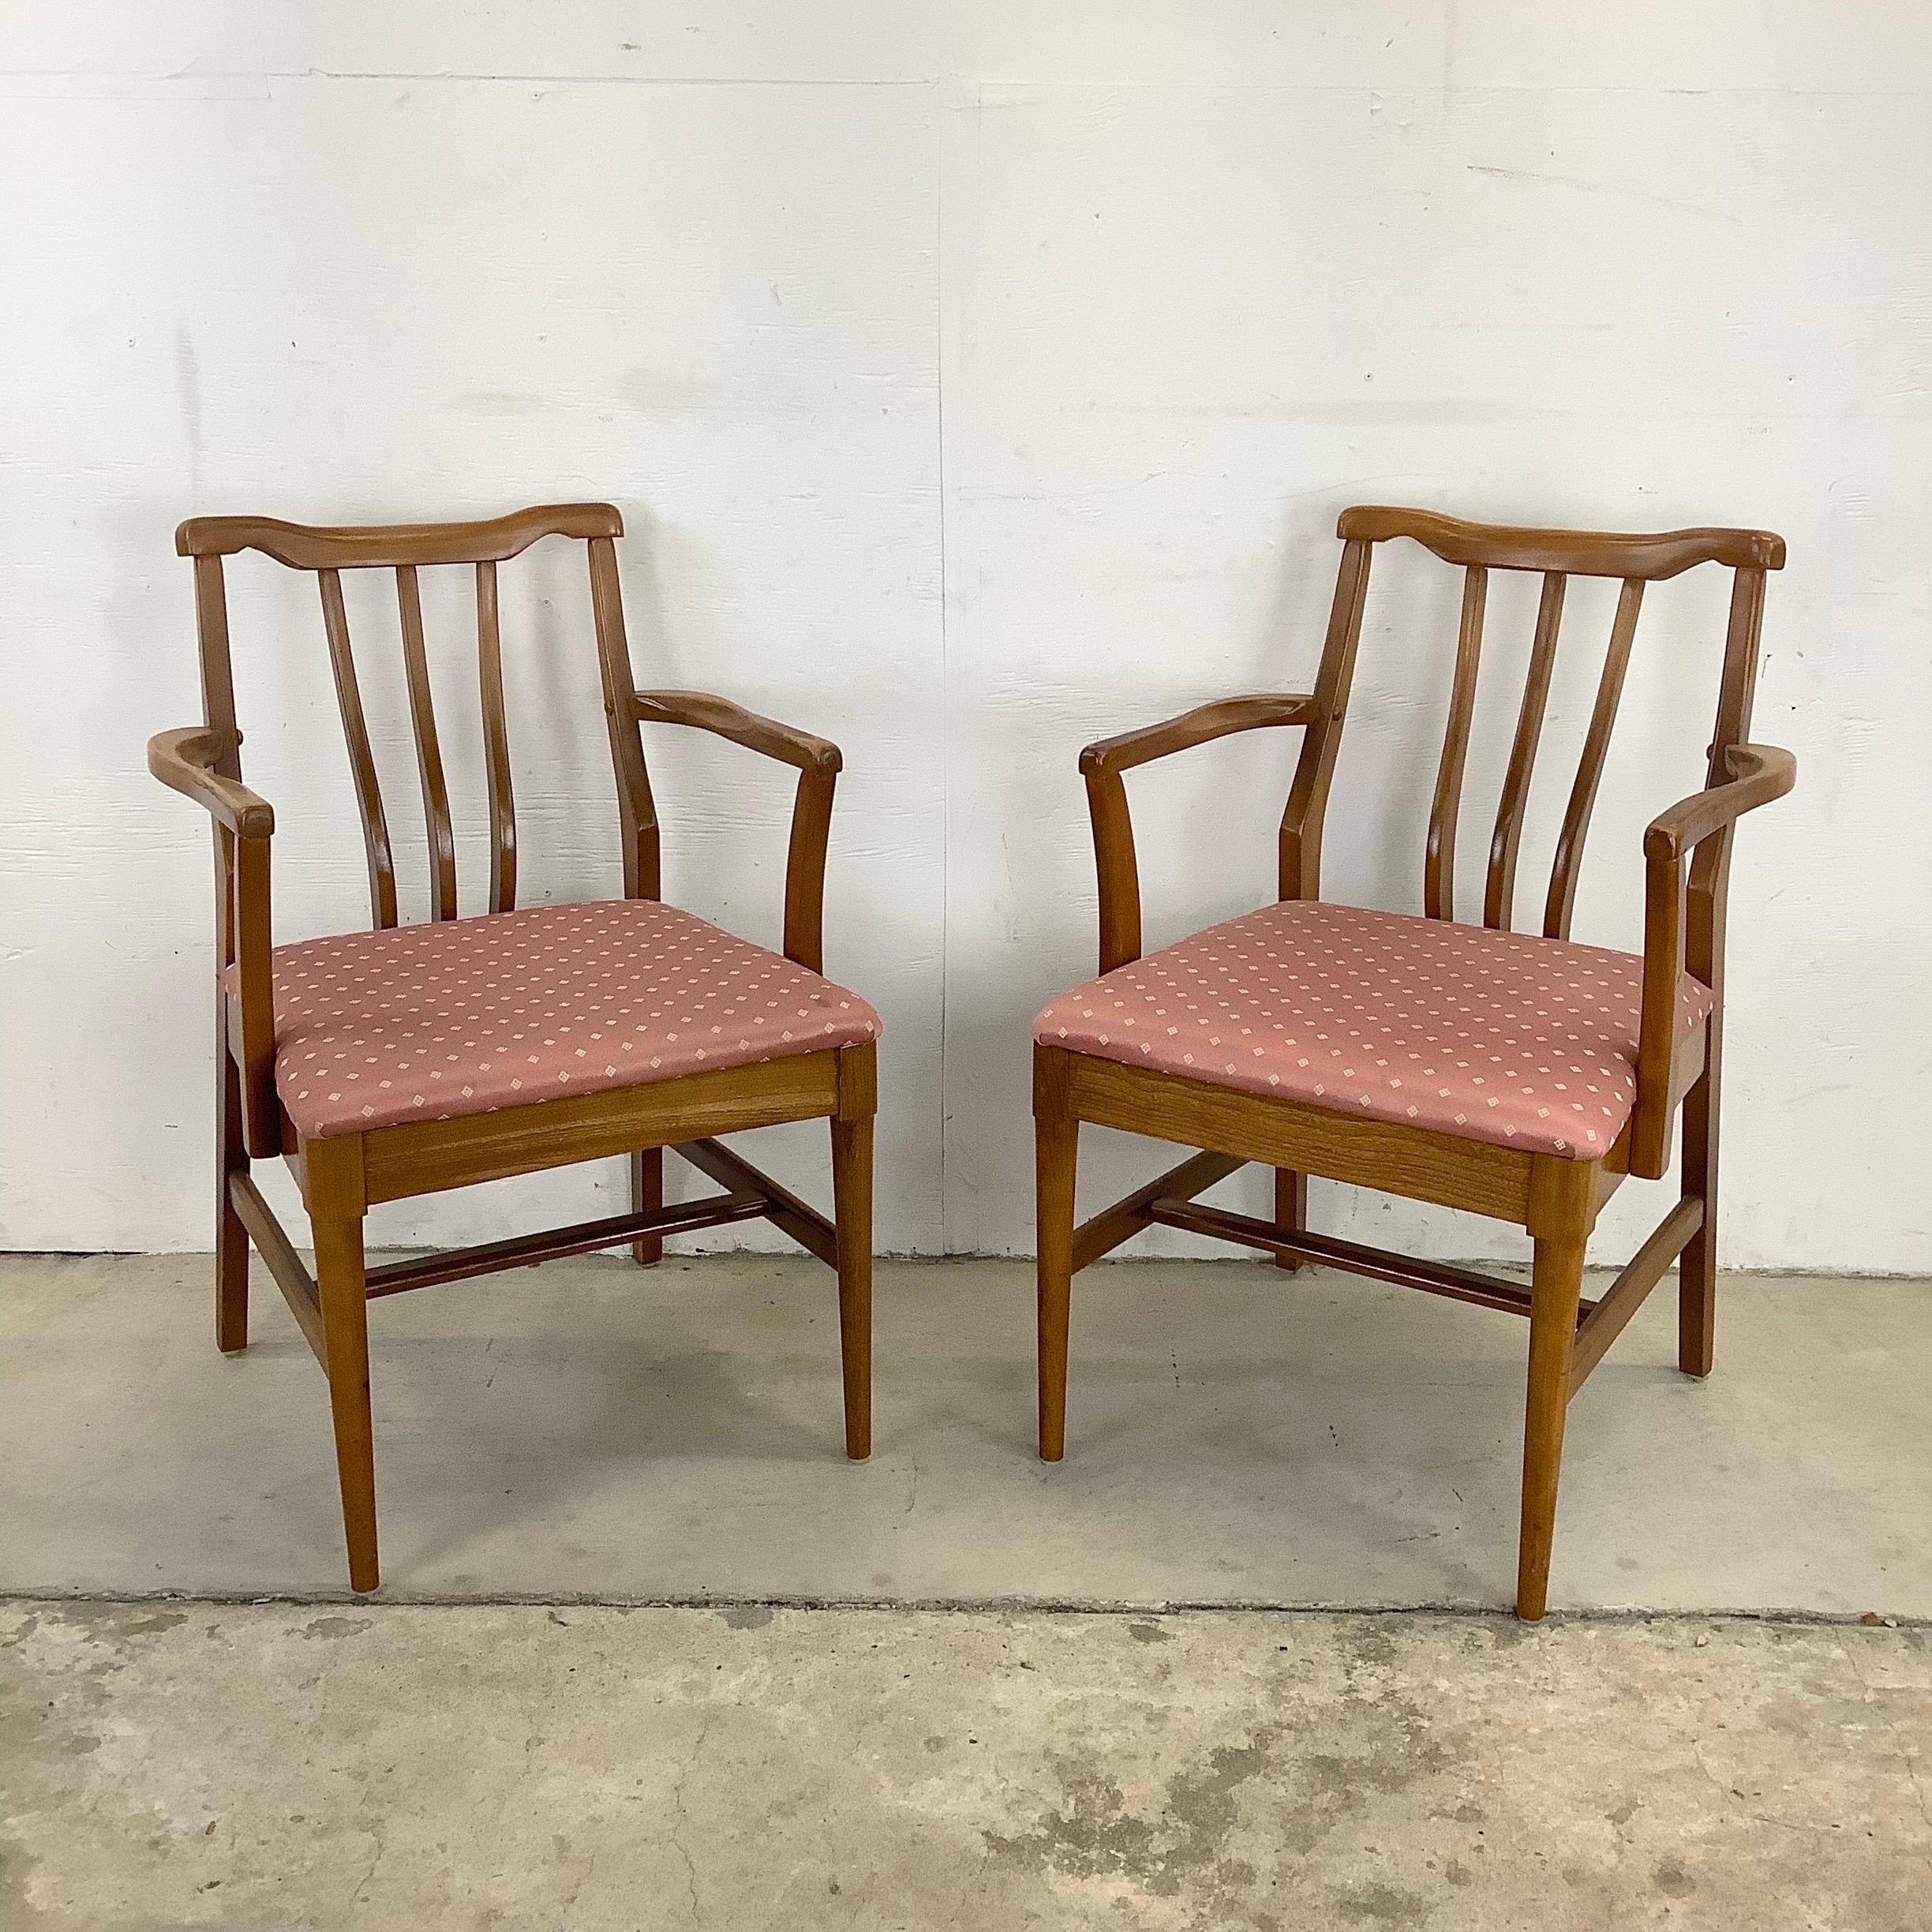 This striking set of eight mid-century modern dining chairs feature low back design with sculptural walnut details and comfortably proportioned seats. Vintage upholstery can be easily recovered while the timeless danish modern style of this matching